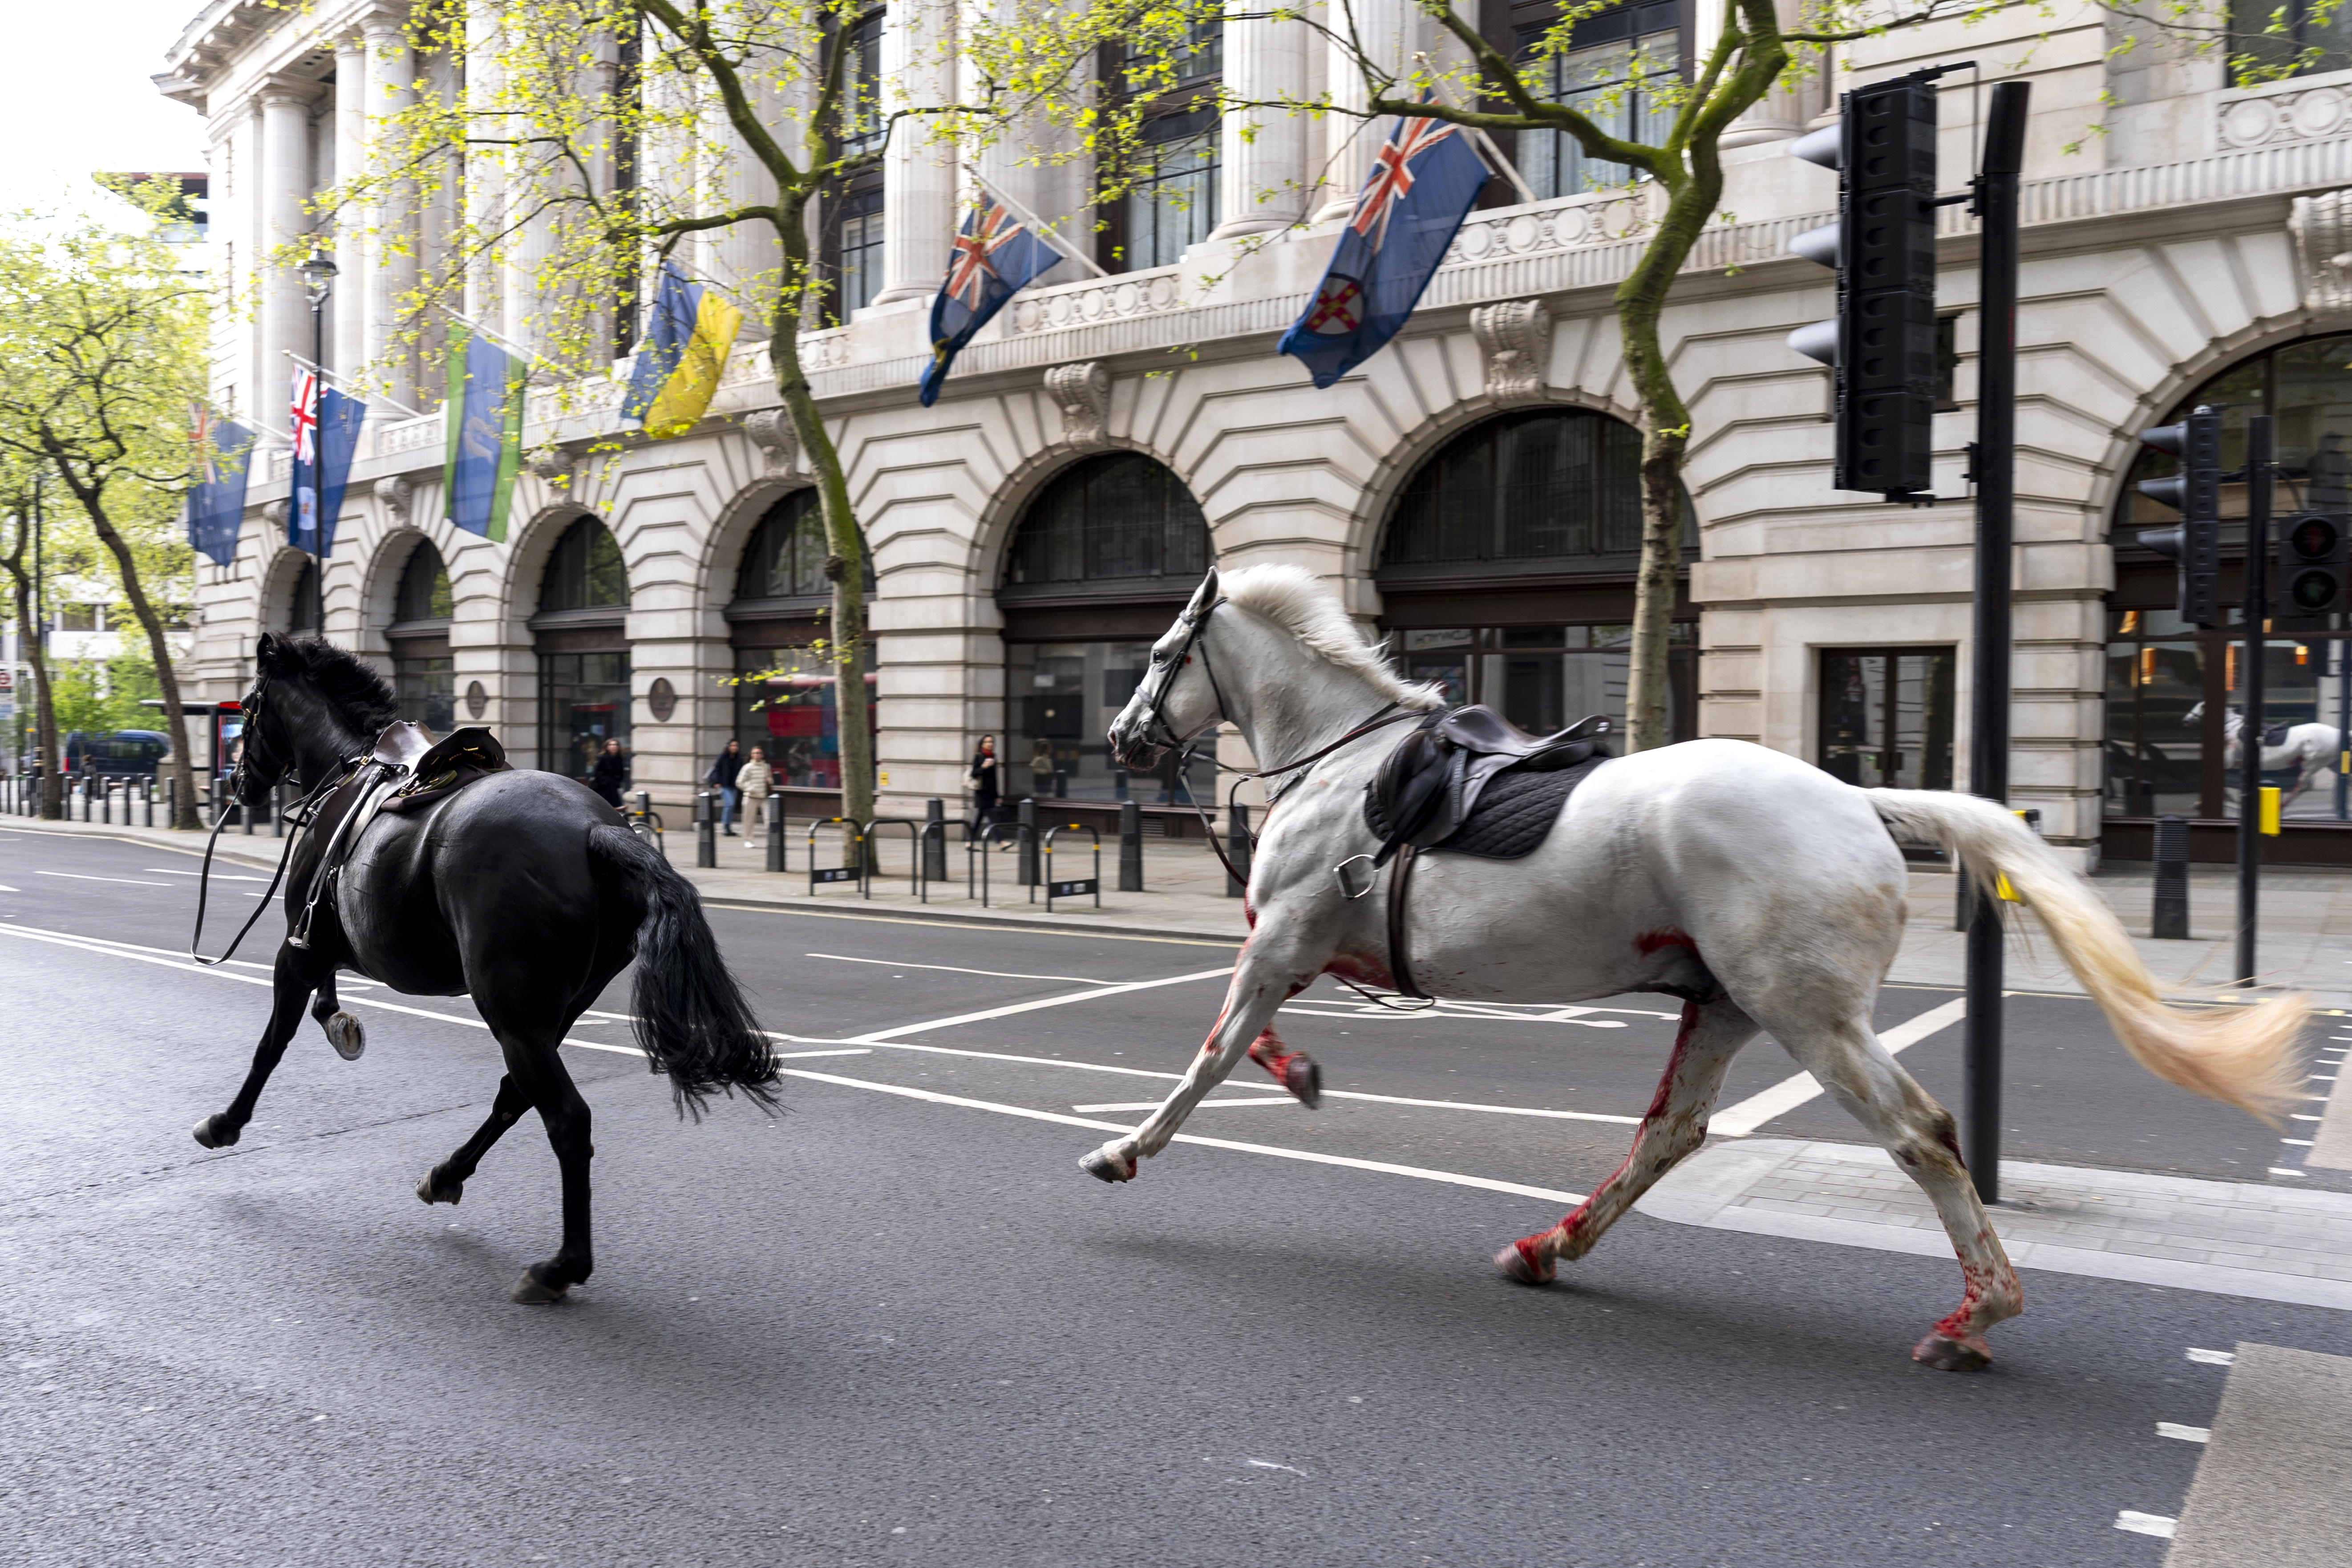 At least 4 people injured as military horses run loose in central London